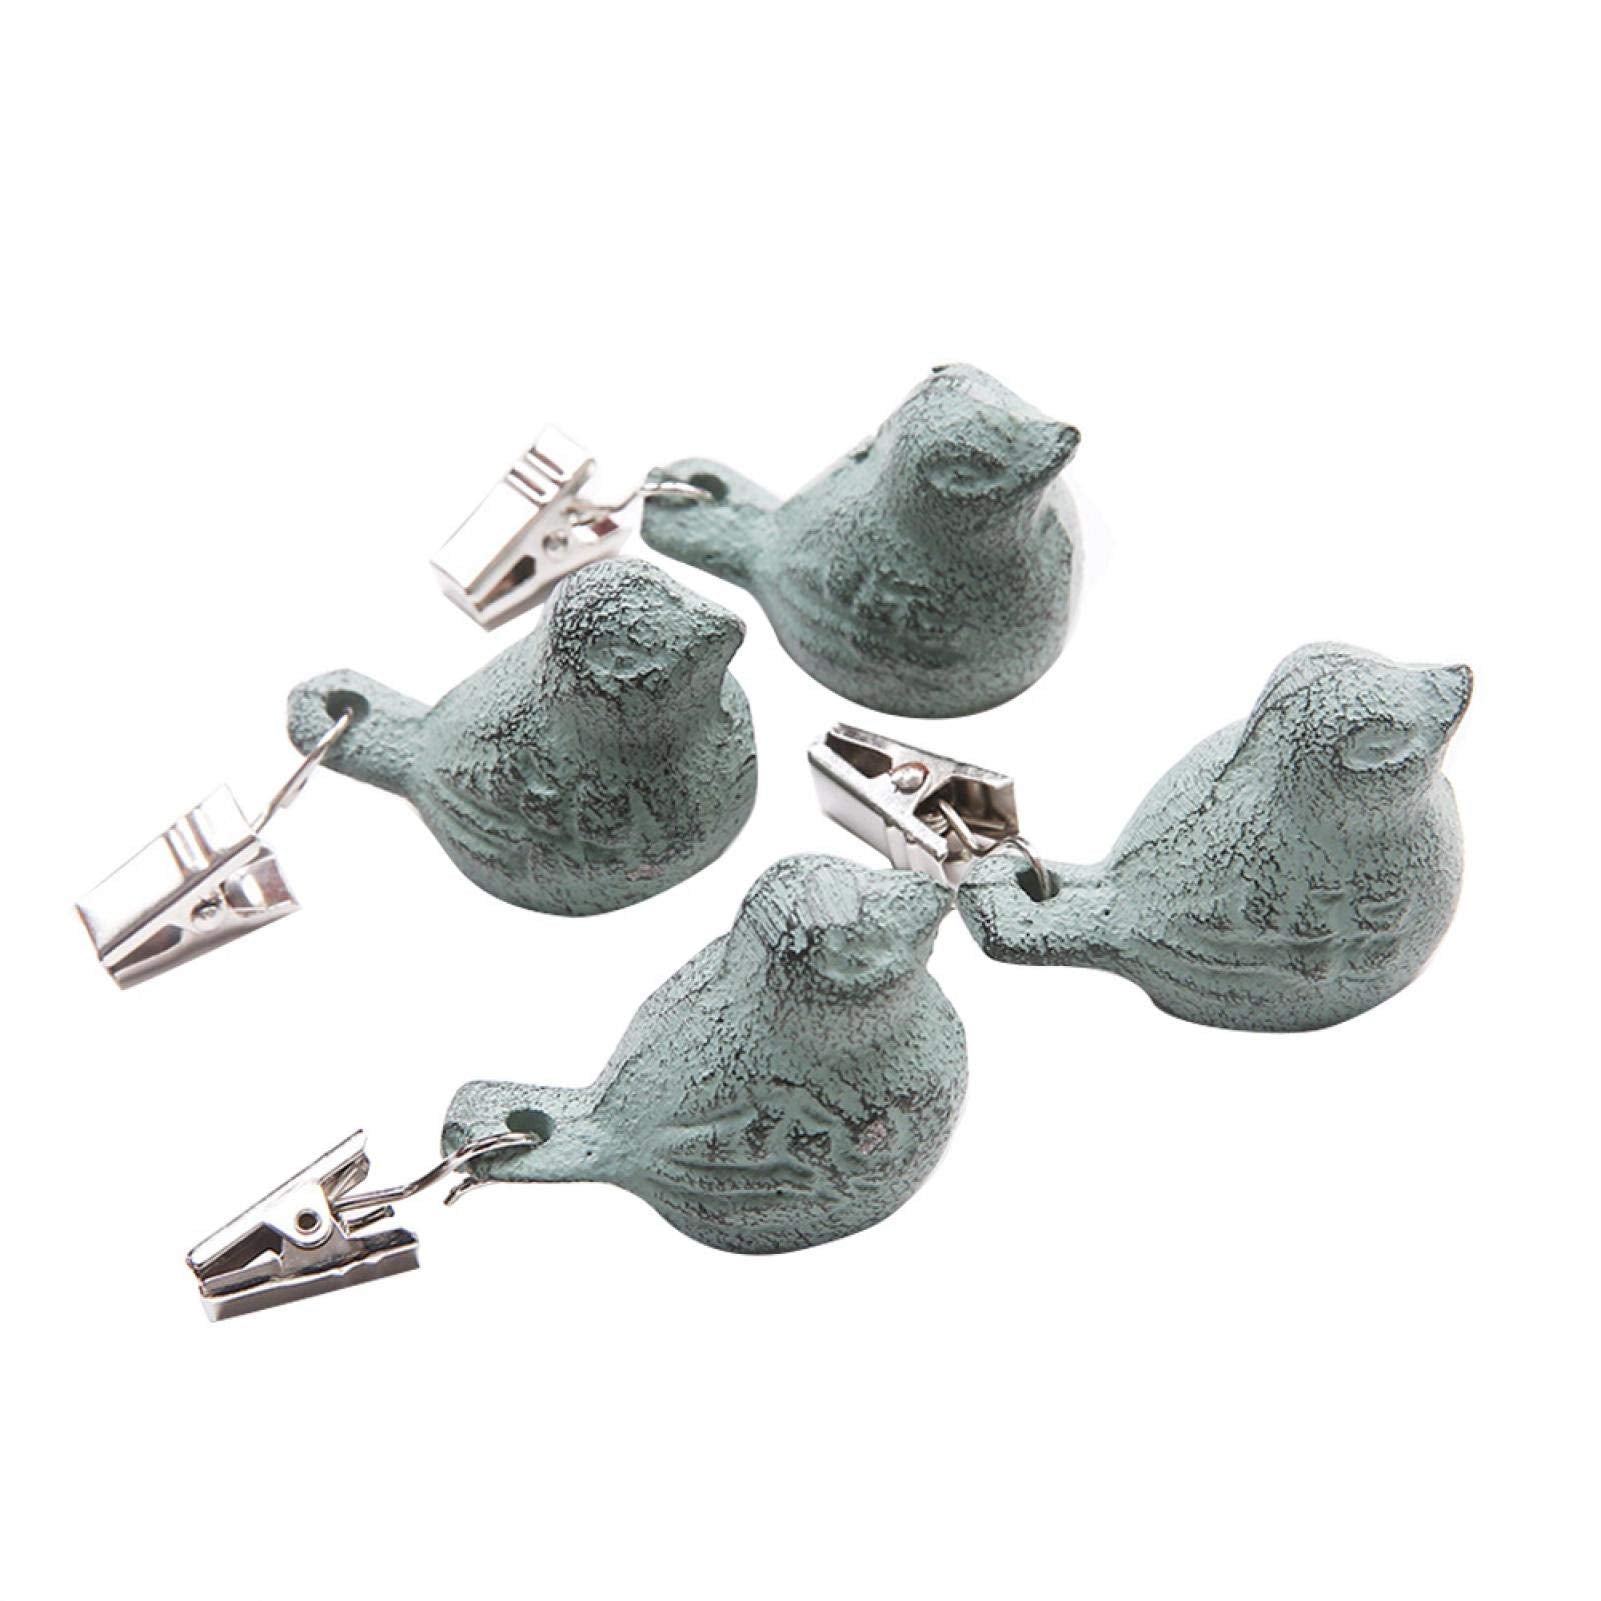 MOVKZACV 4 Pieces Tablecloth Weights Clips, Iron Antique Bird Pendant Tablecloth Clip Weights, Table Cloth Weights Clip On Heavy For Outdoor Table, Garden Party Wedding Camping Picnic